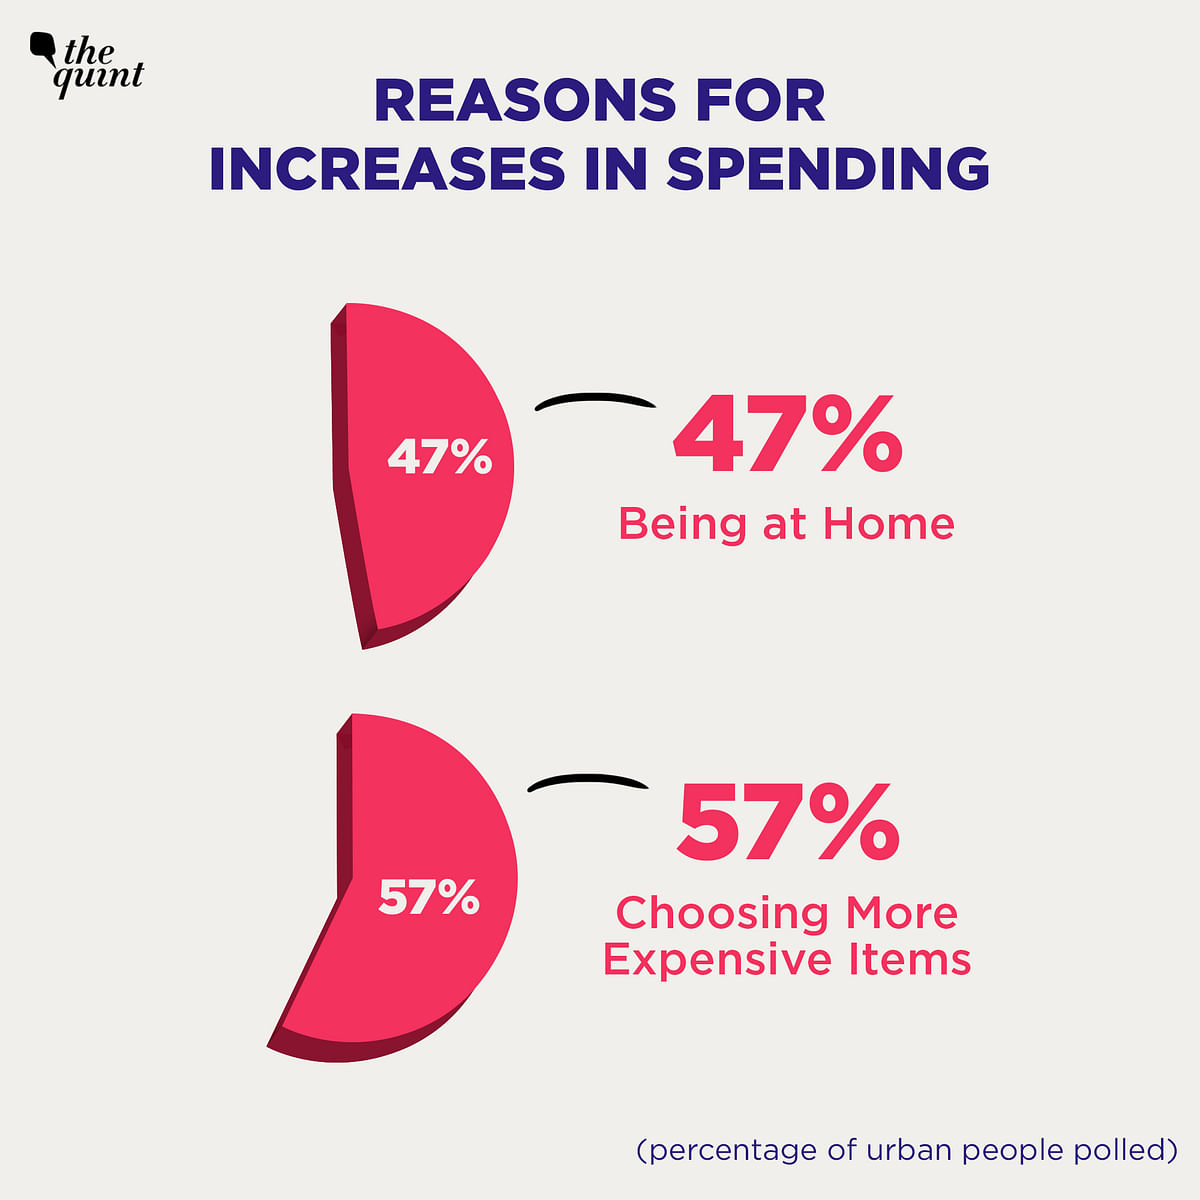 Ipsos Cost of Living Survey (of urban Indians) finds people spent more because they were at home, not higher prices.